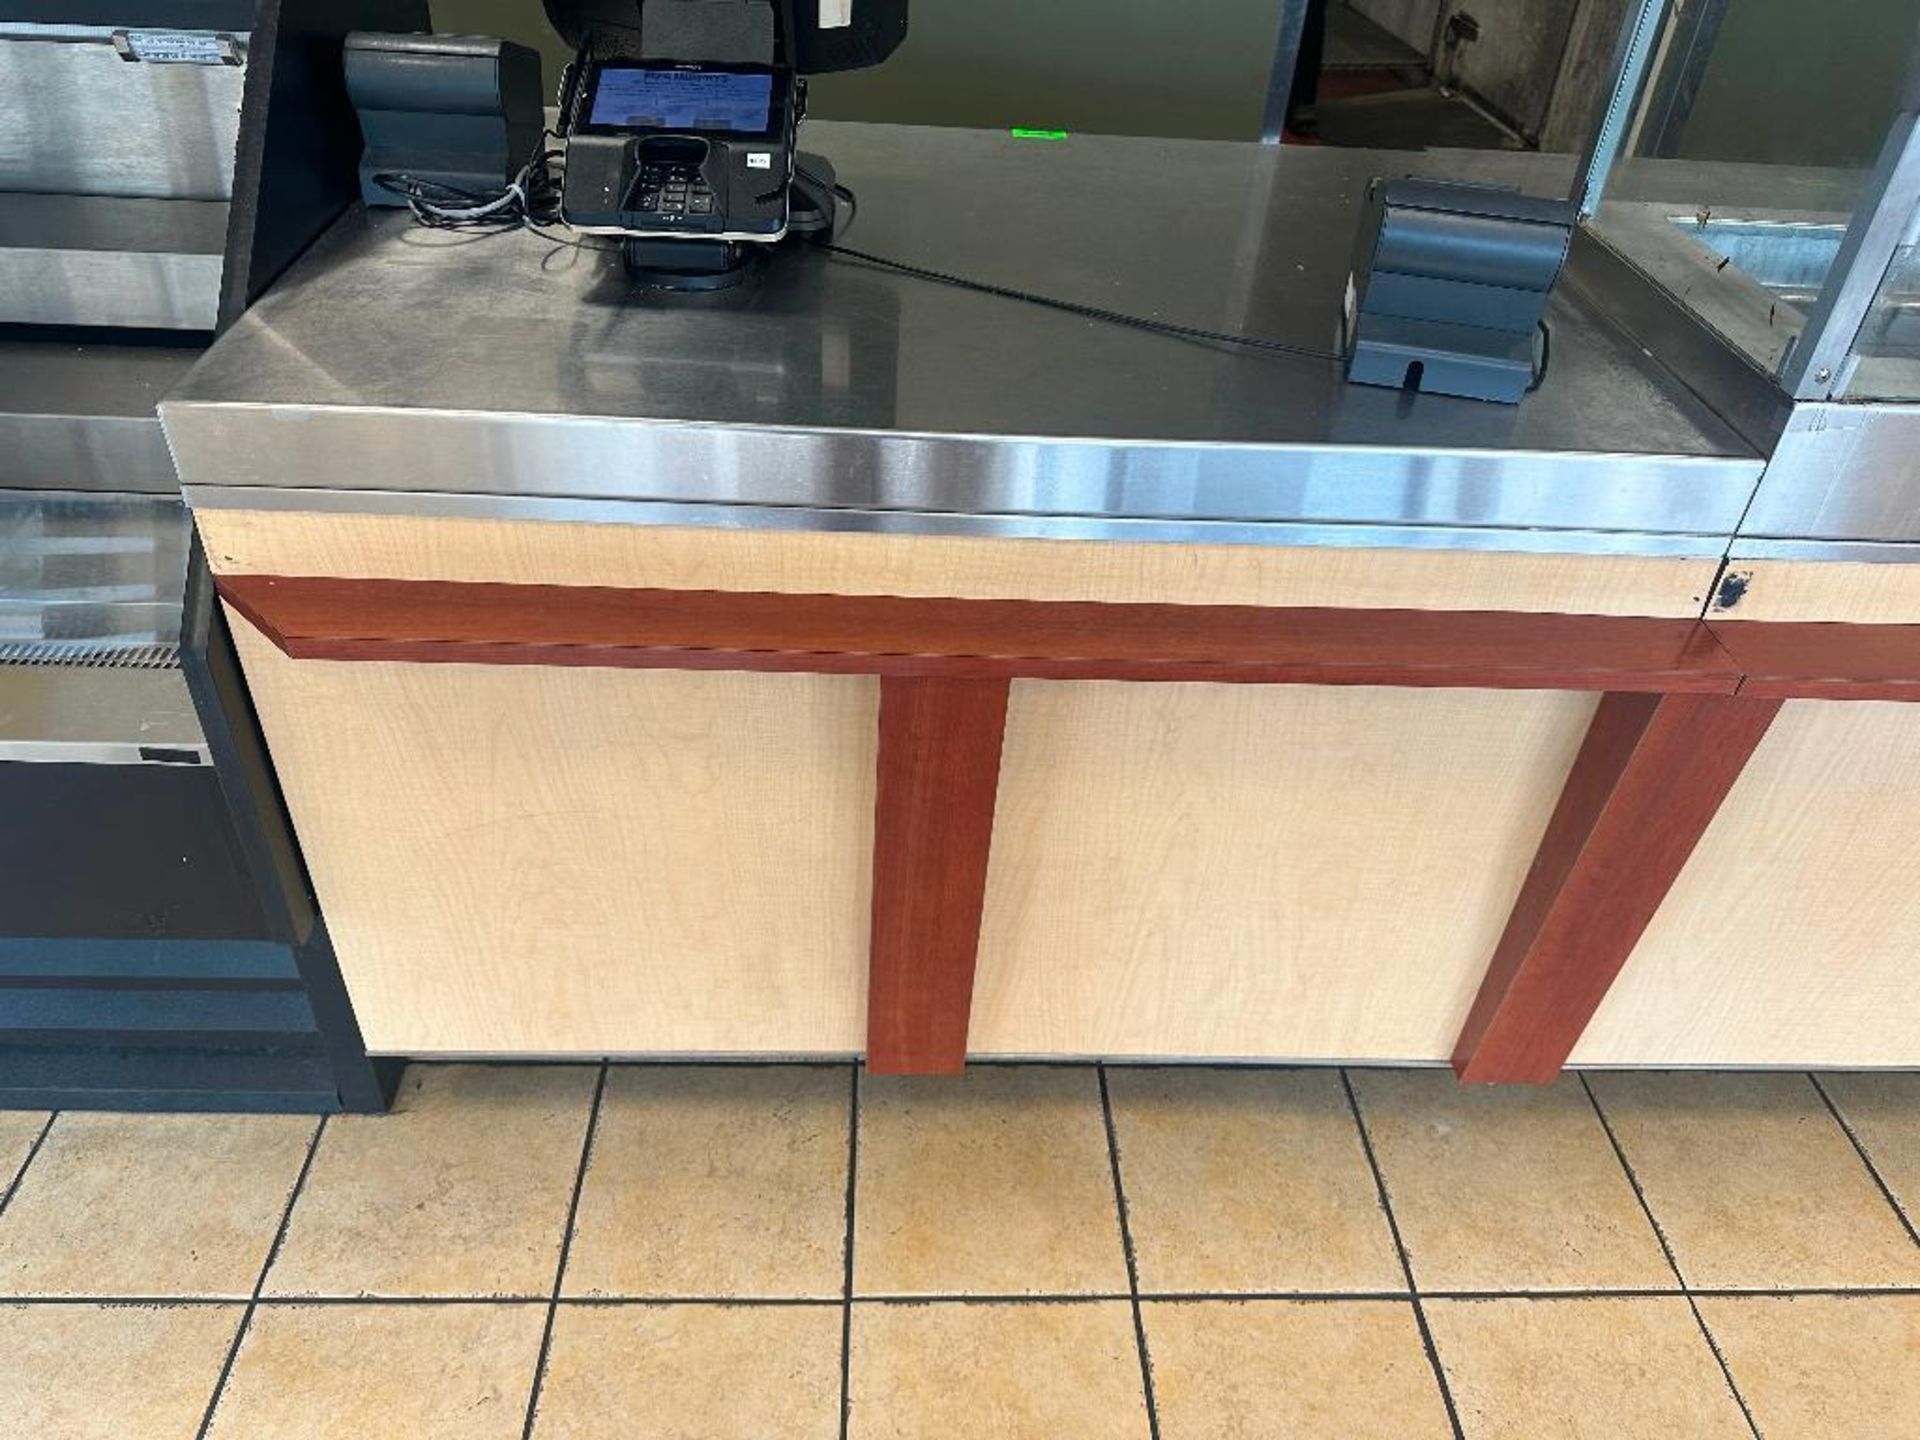 DESCRIPTION 14' OF STAINLESS SALES COUNTER, IN THREE SECTIONS. ADDITIONAL INFORMATION 6' CORNER SECT